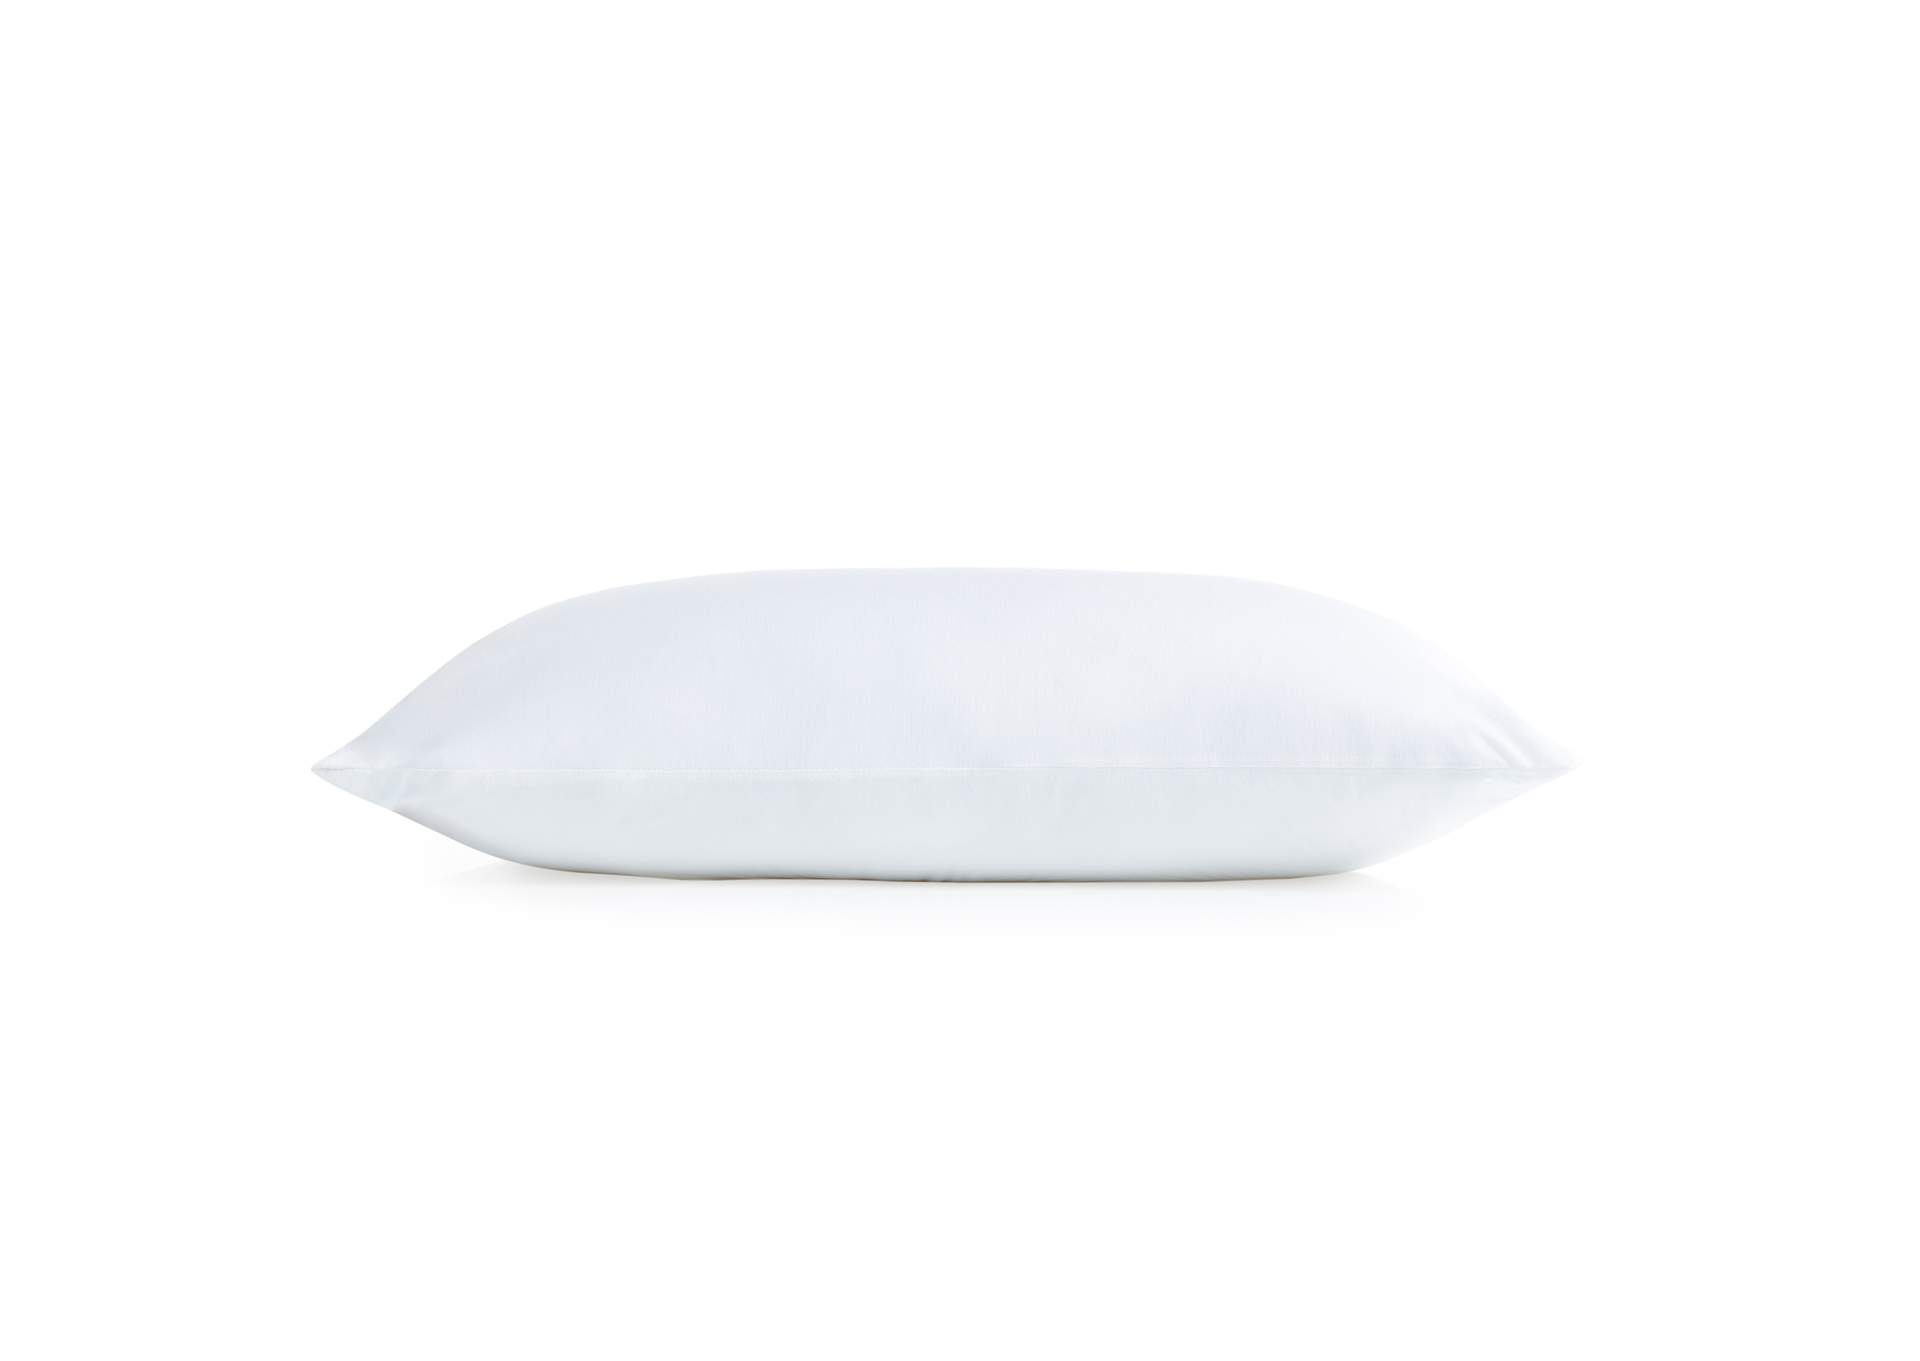 Malouf Five 5ided Omniphase Pillow Protector - King Size,Malouf